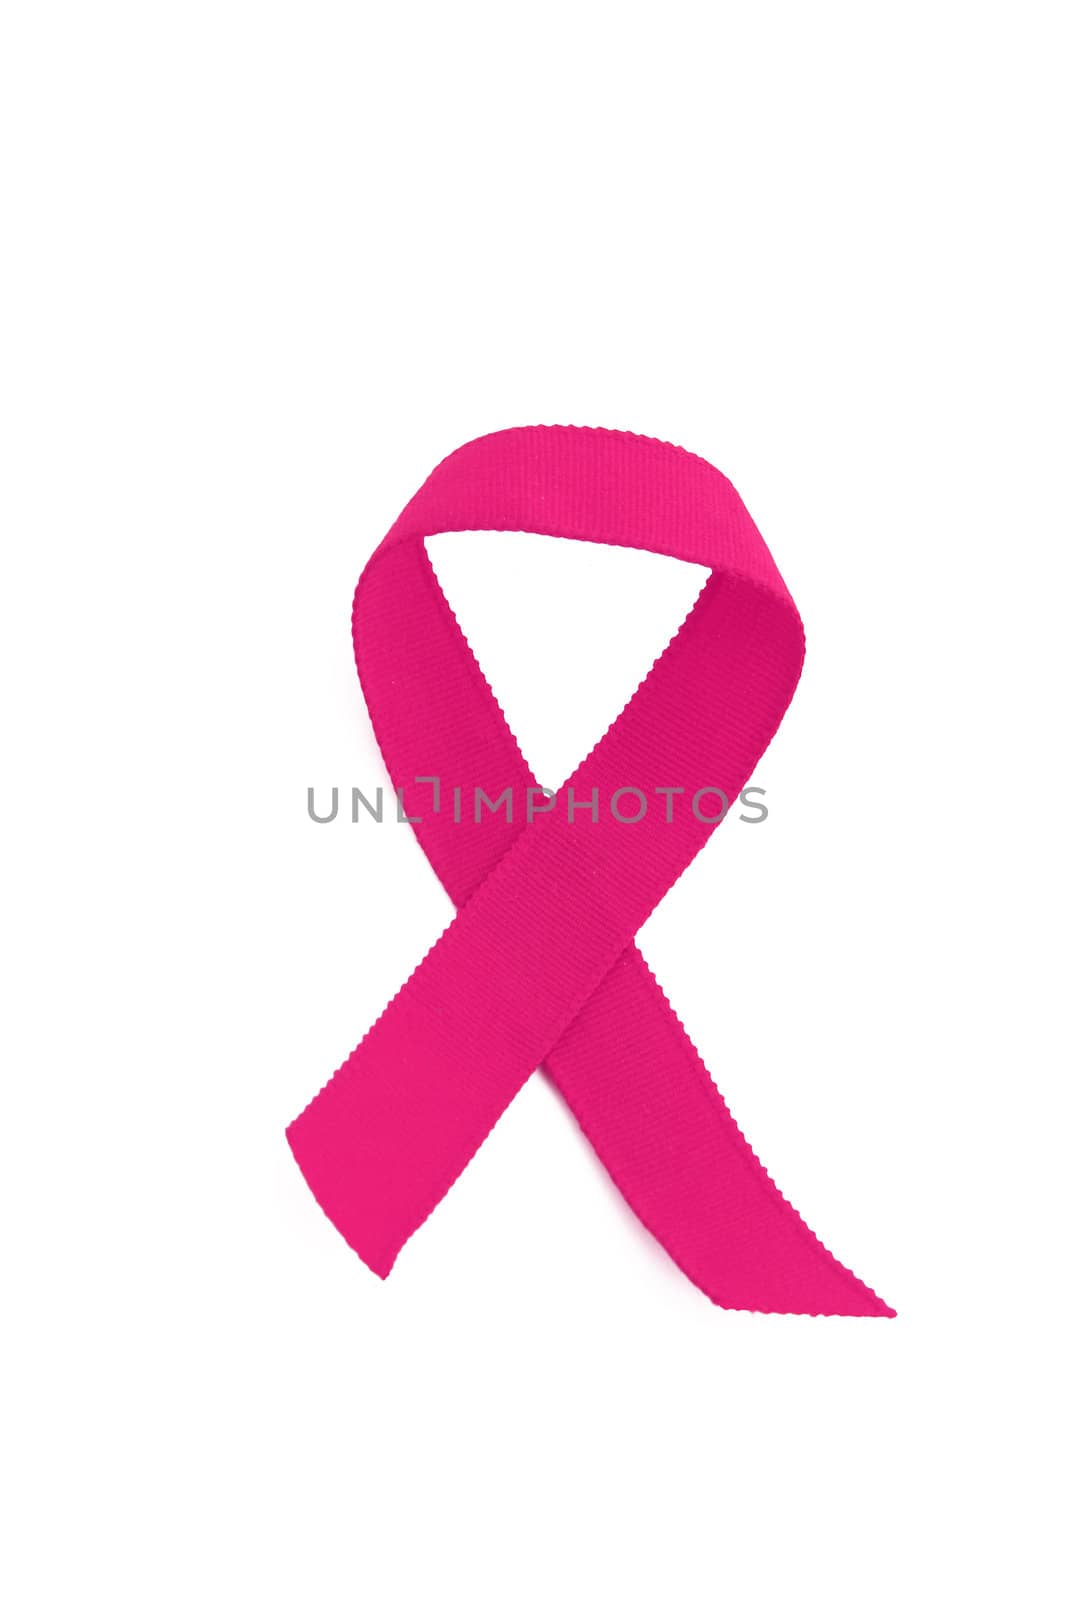 a pink breast cancer ribbon